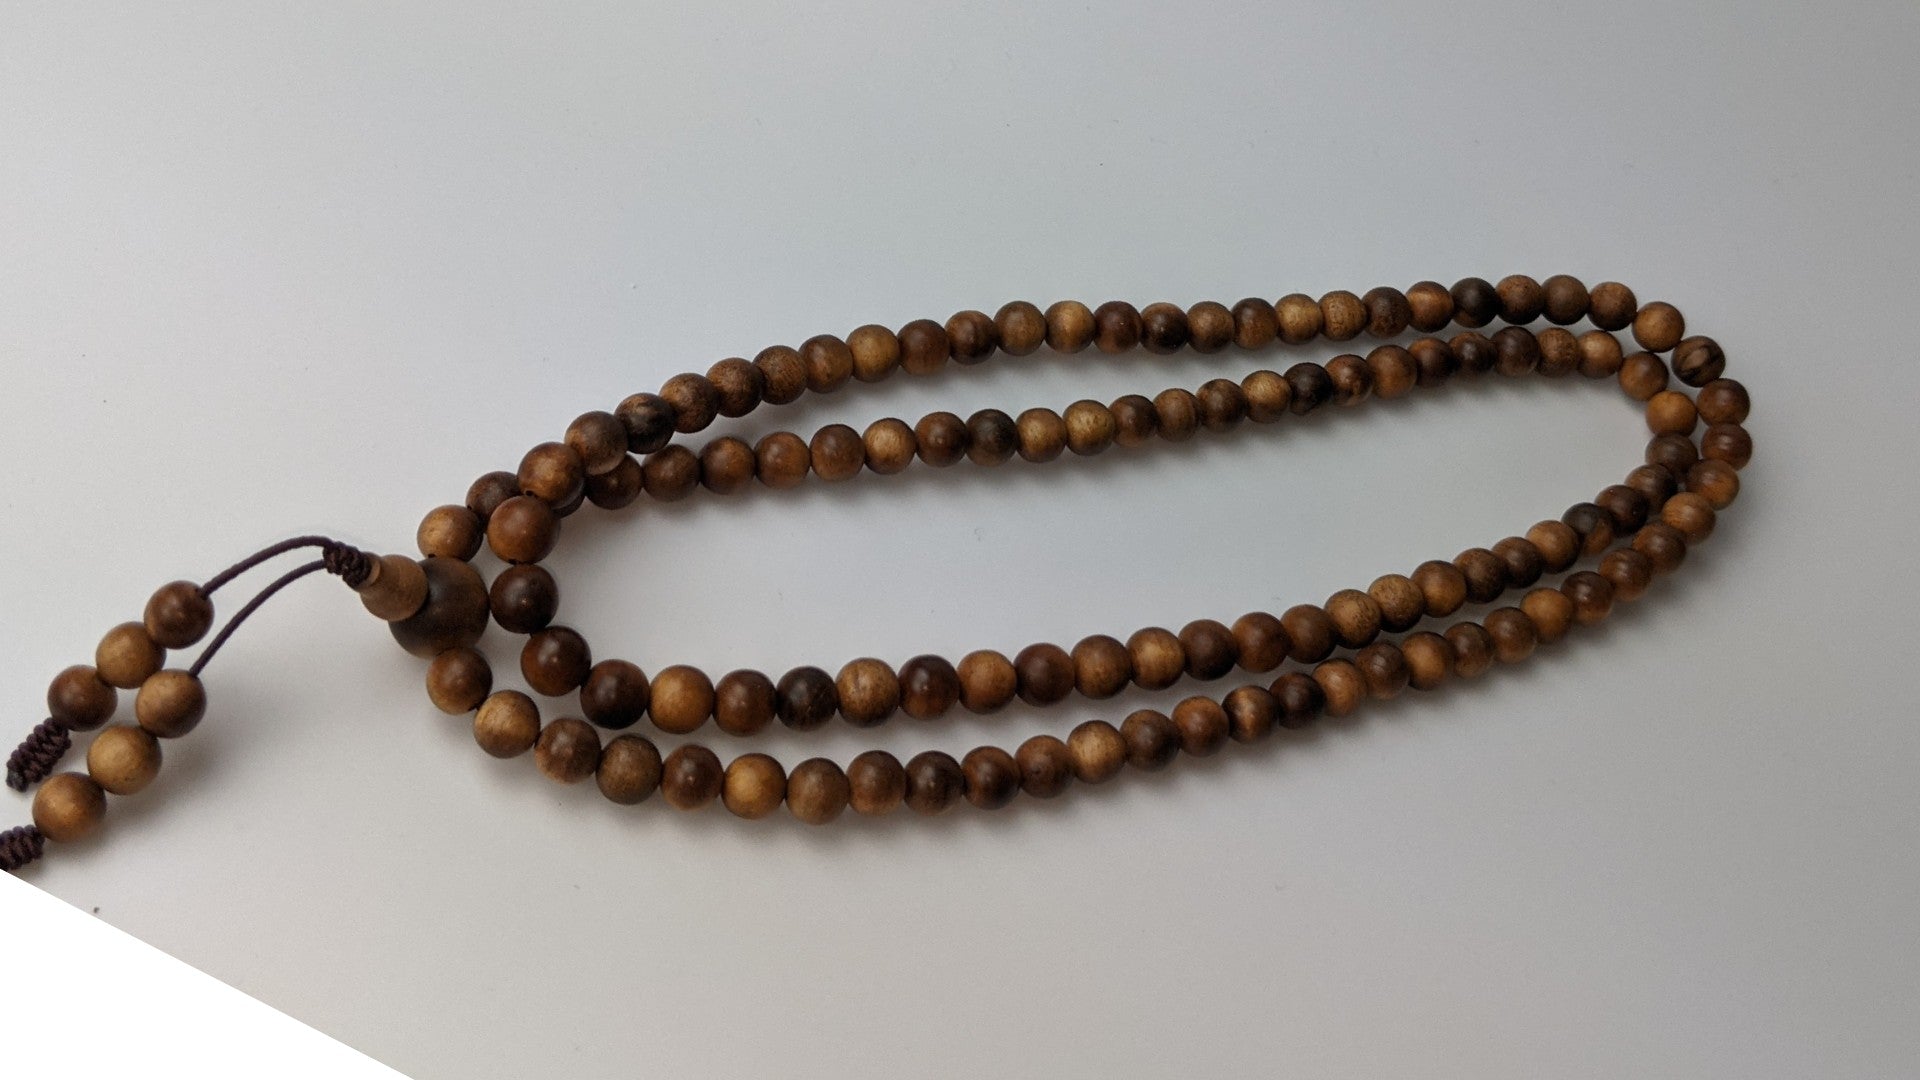 "The Beauty of the Death" Wild Aged Sandalwood beads - 1 x 108 mala 6mm - heavy sinking beads Dimension: 6mm Weight around 17g